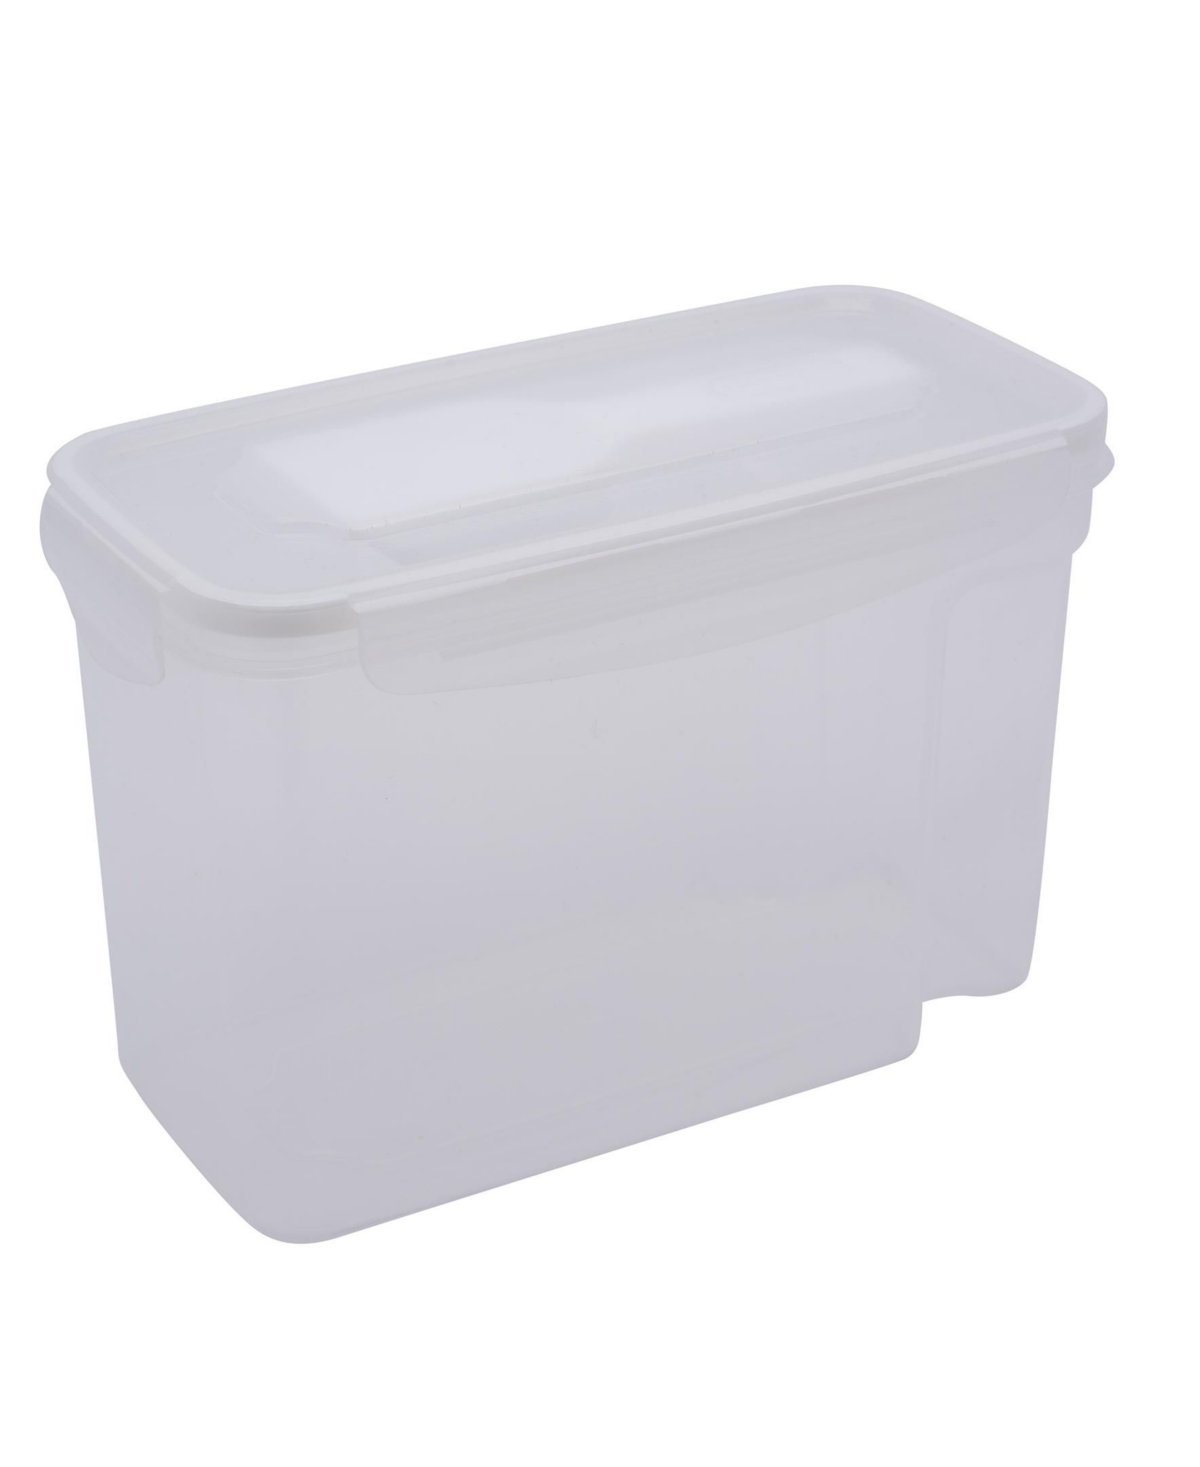 Medium Size Airtight Cereal Container with Scooper - Clear